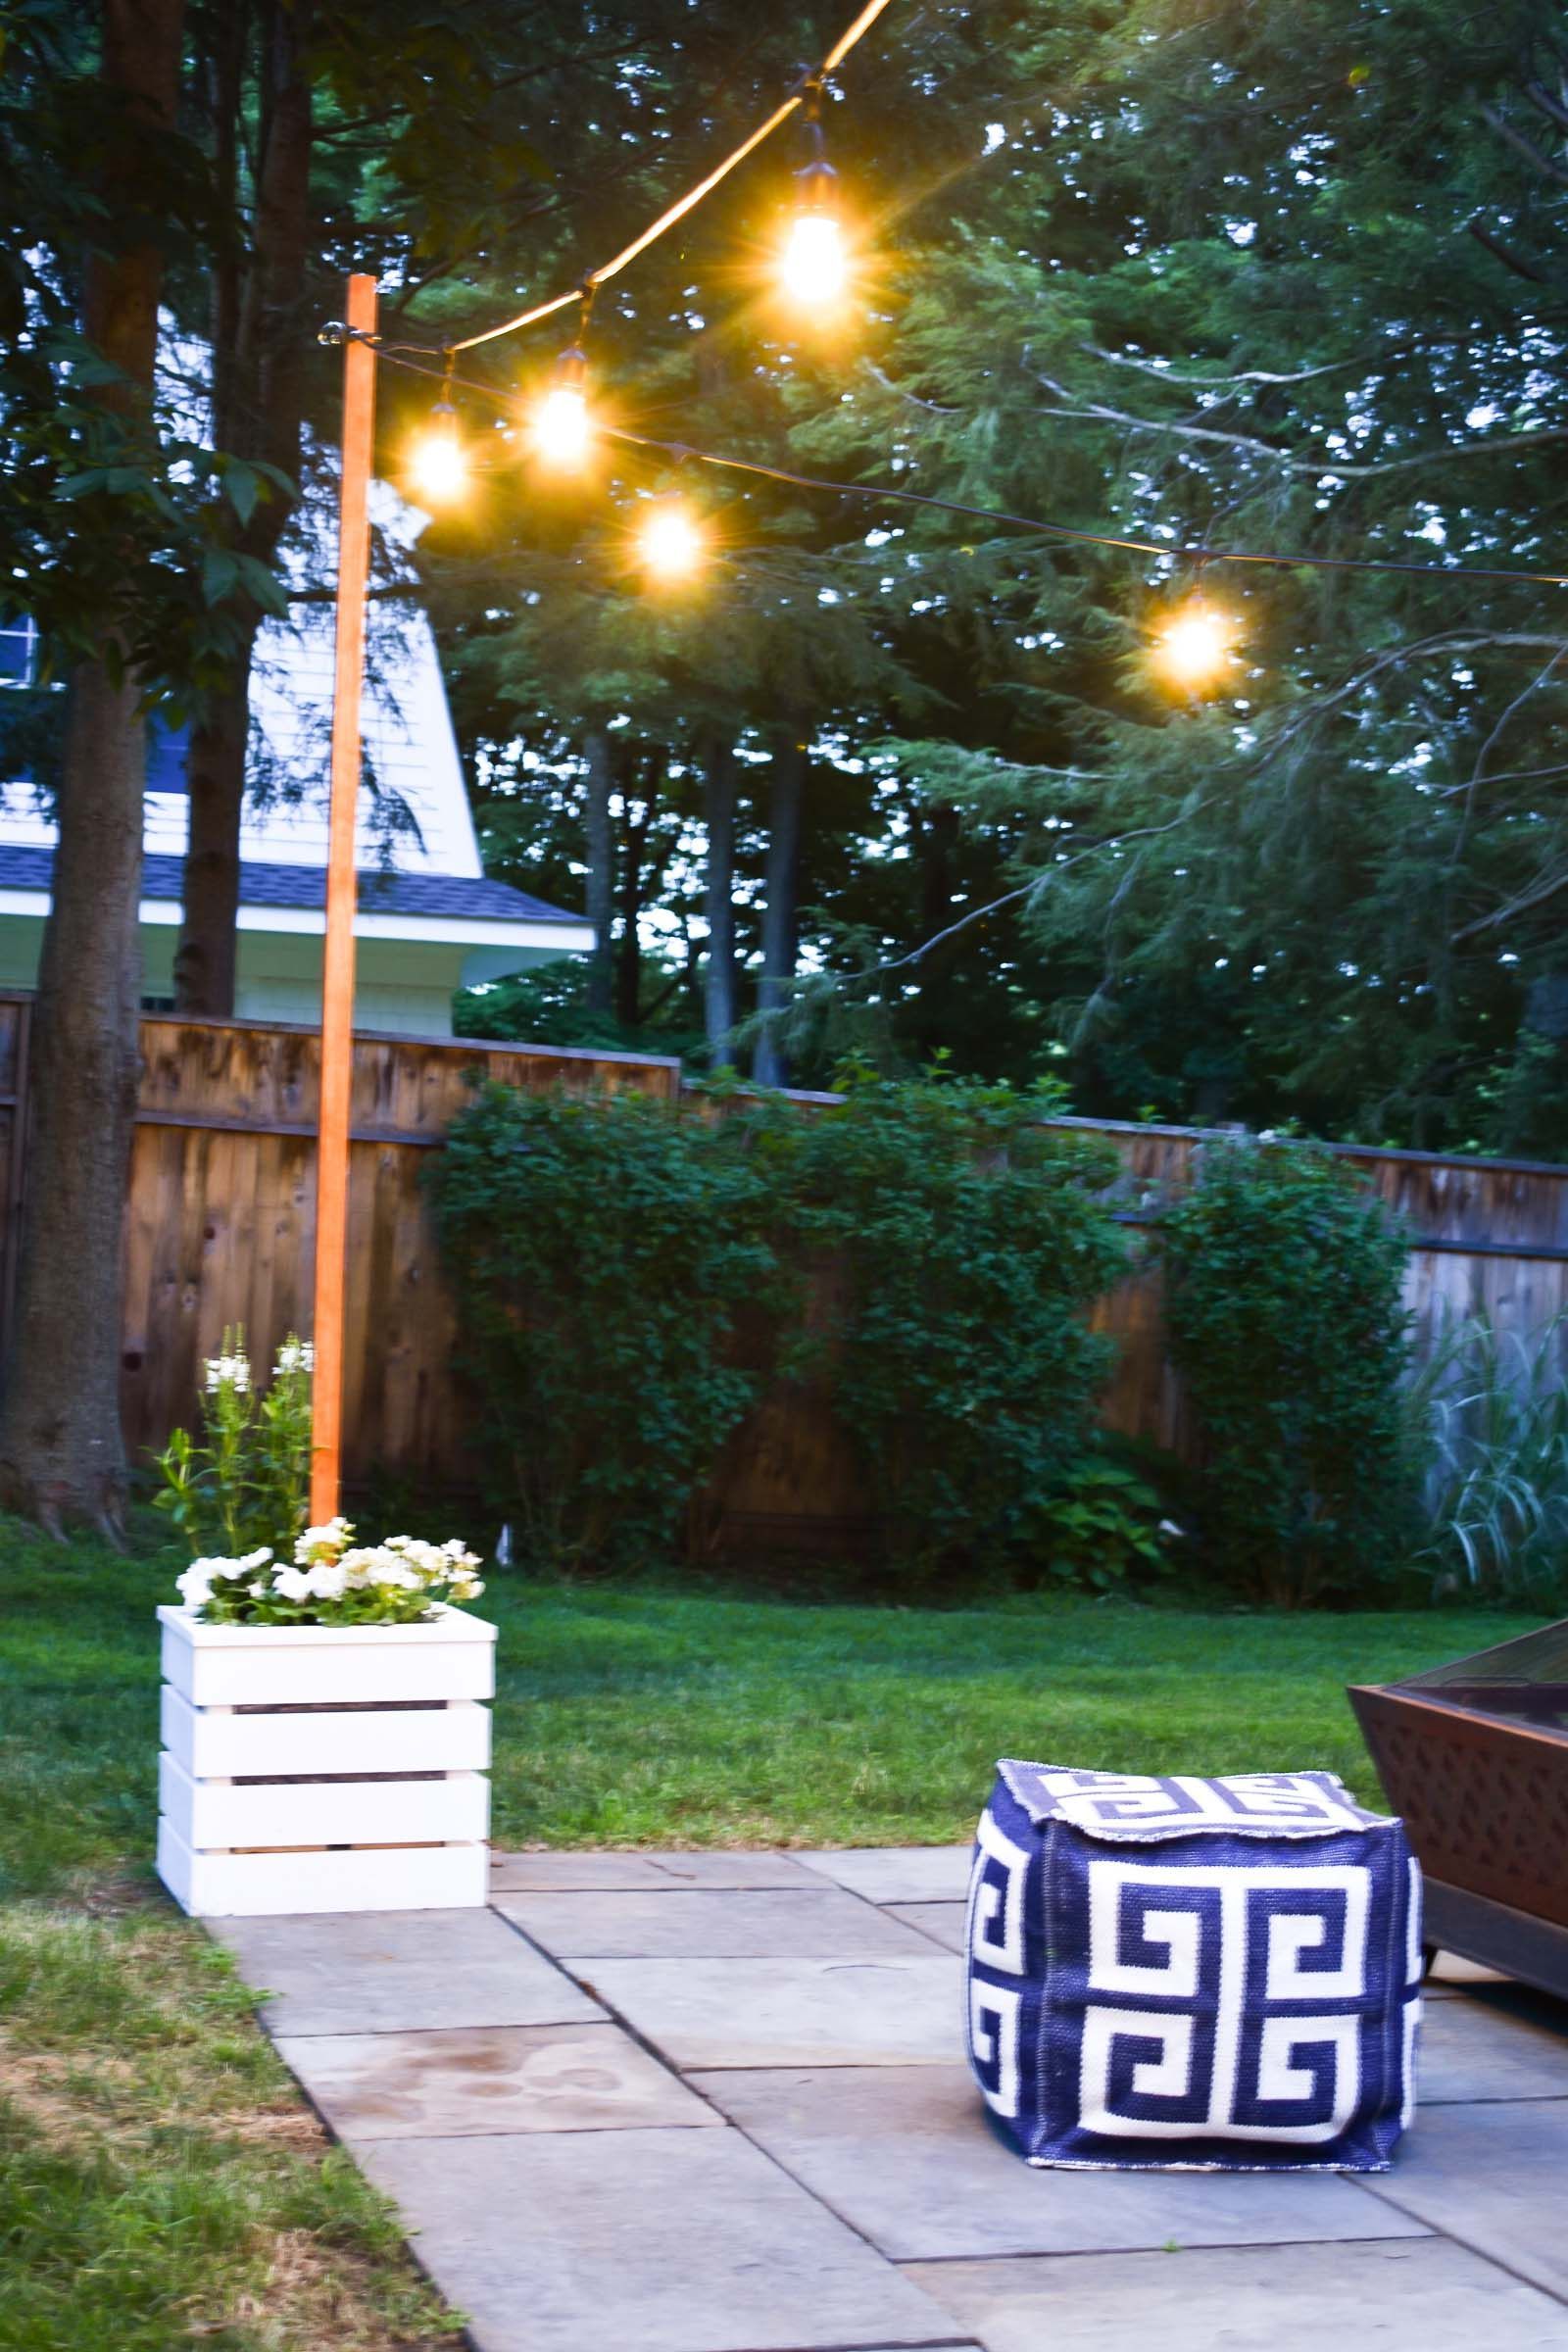 DIY Planter with Pole for String Lights -   20 diy projects For Outside planters
 ideas